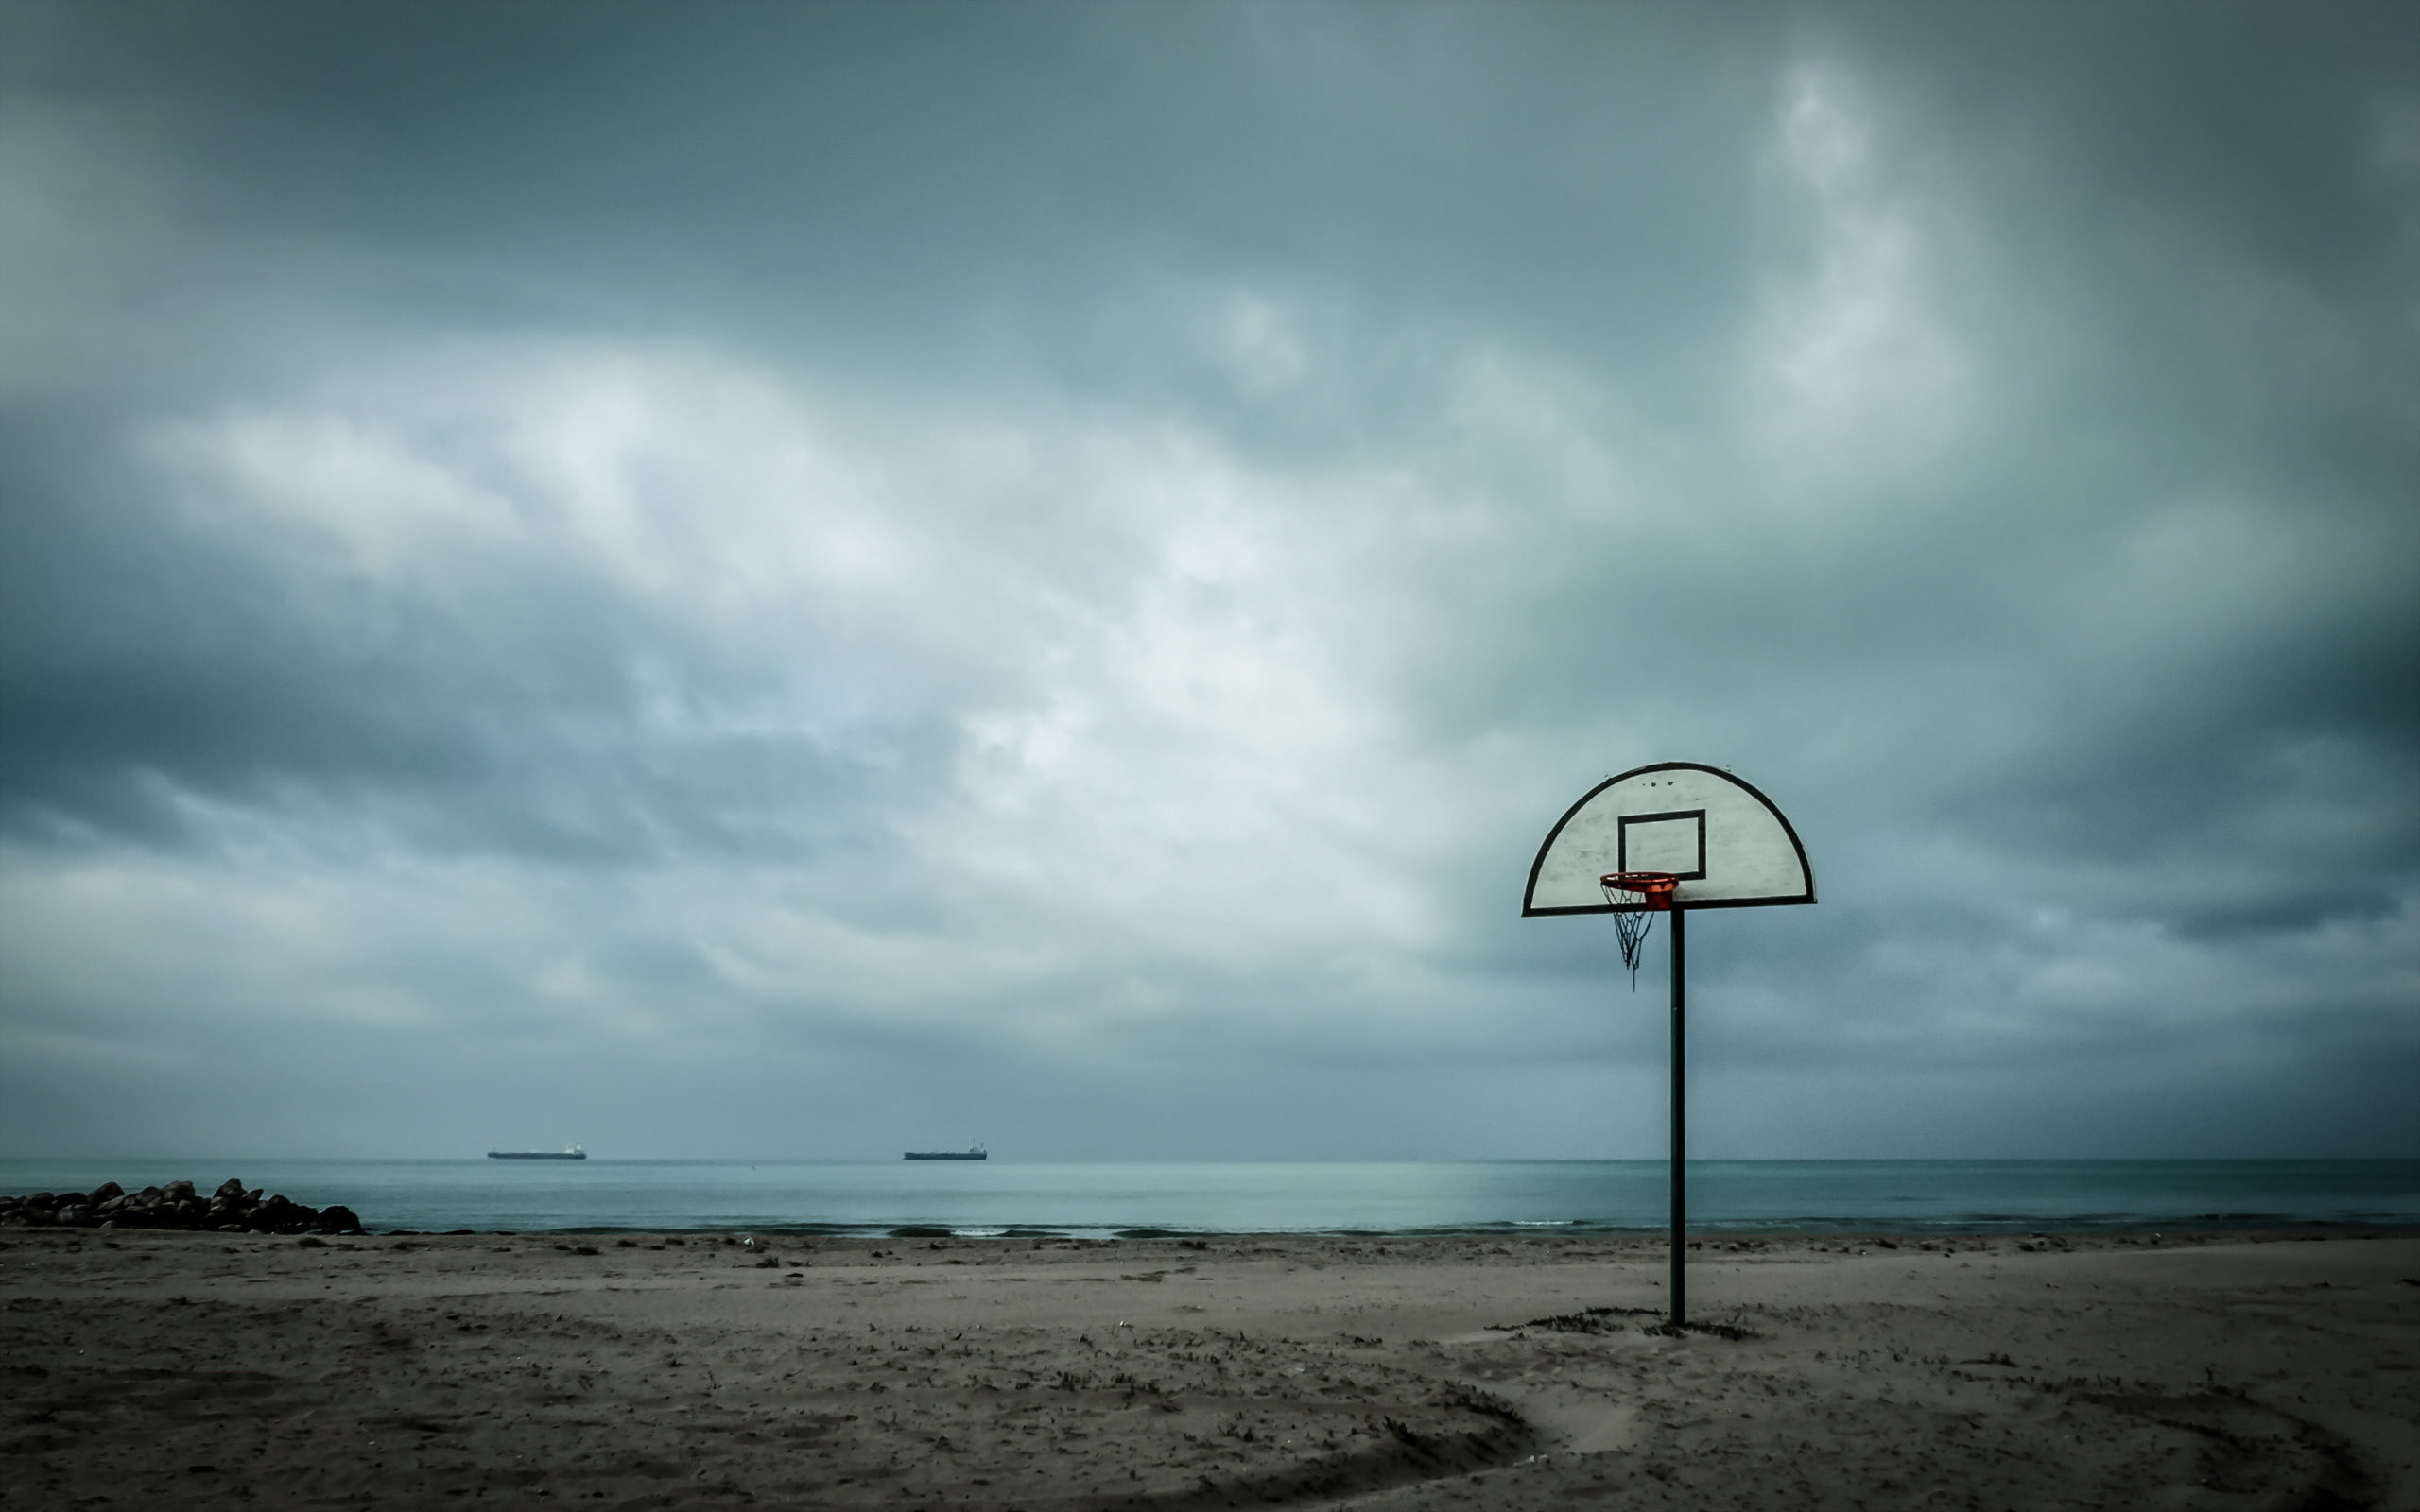 2560x1600 wallpaper.wiki-Download-Basketball-Court-Photo-PIC-WPC002987